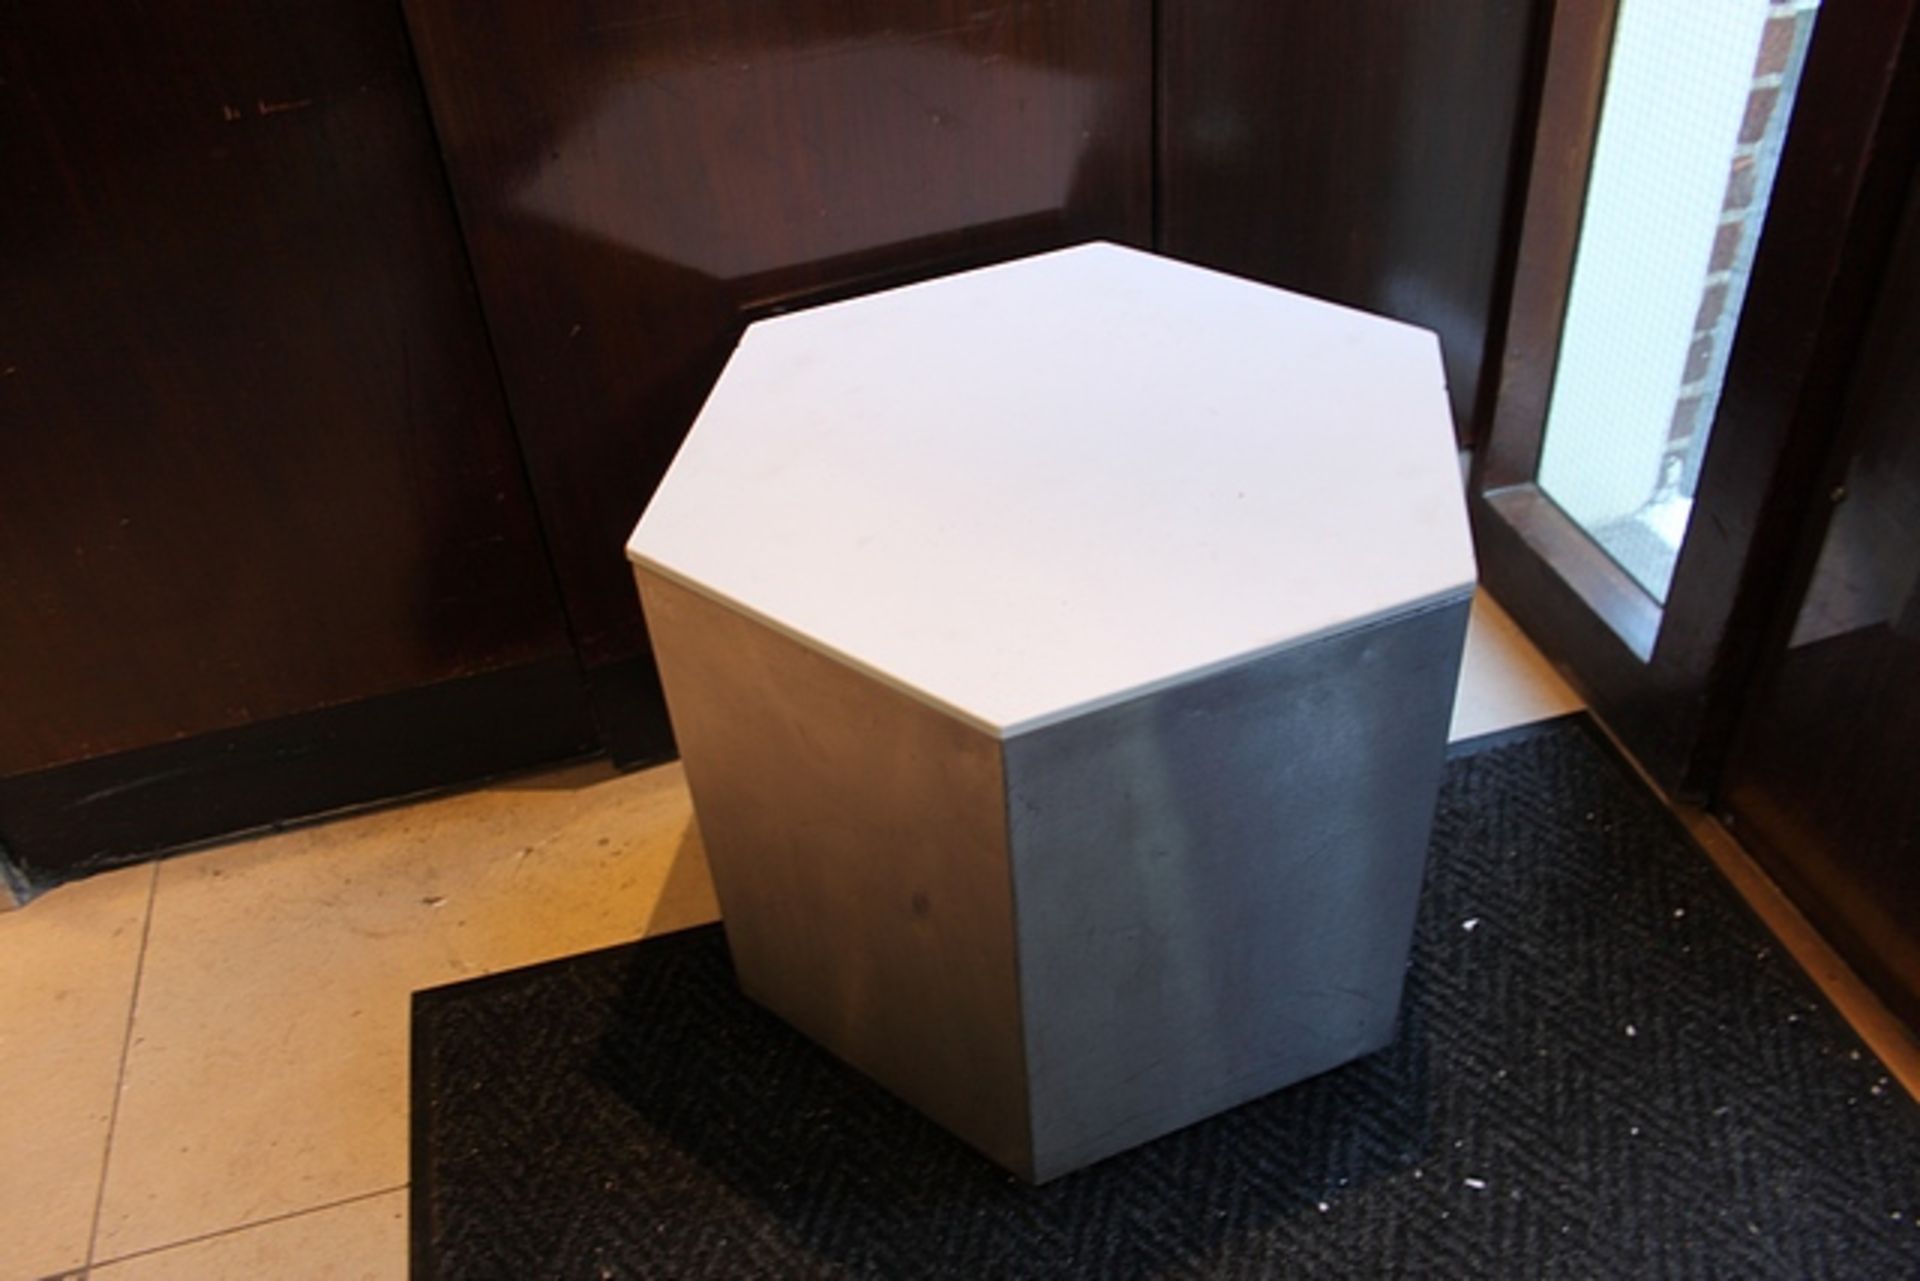 2 x Hexagonal stainless steel and marble top side table 560mm x 480mm tall